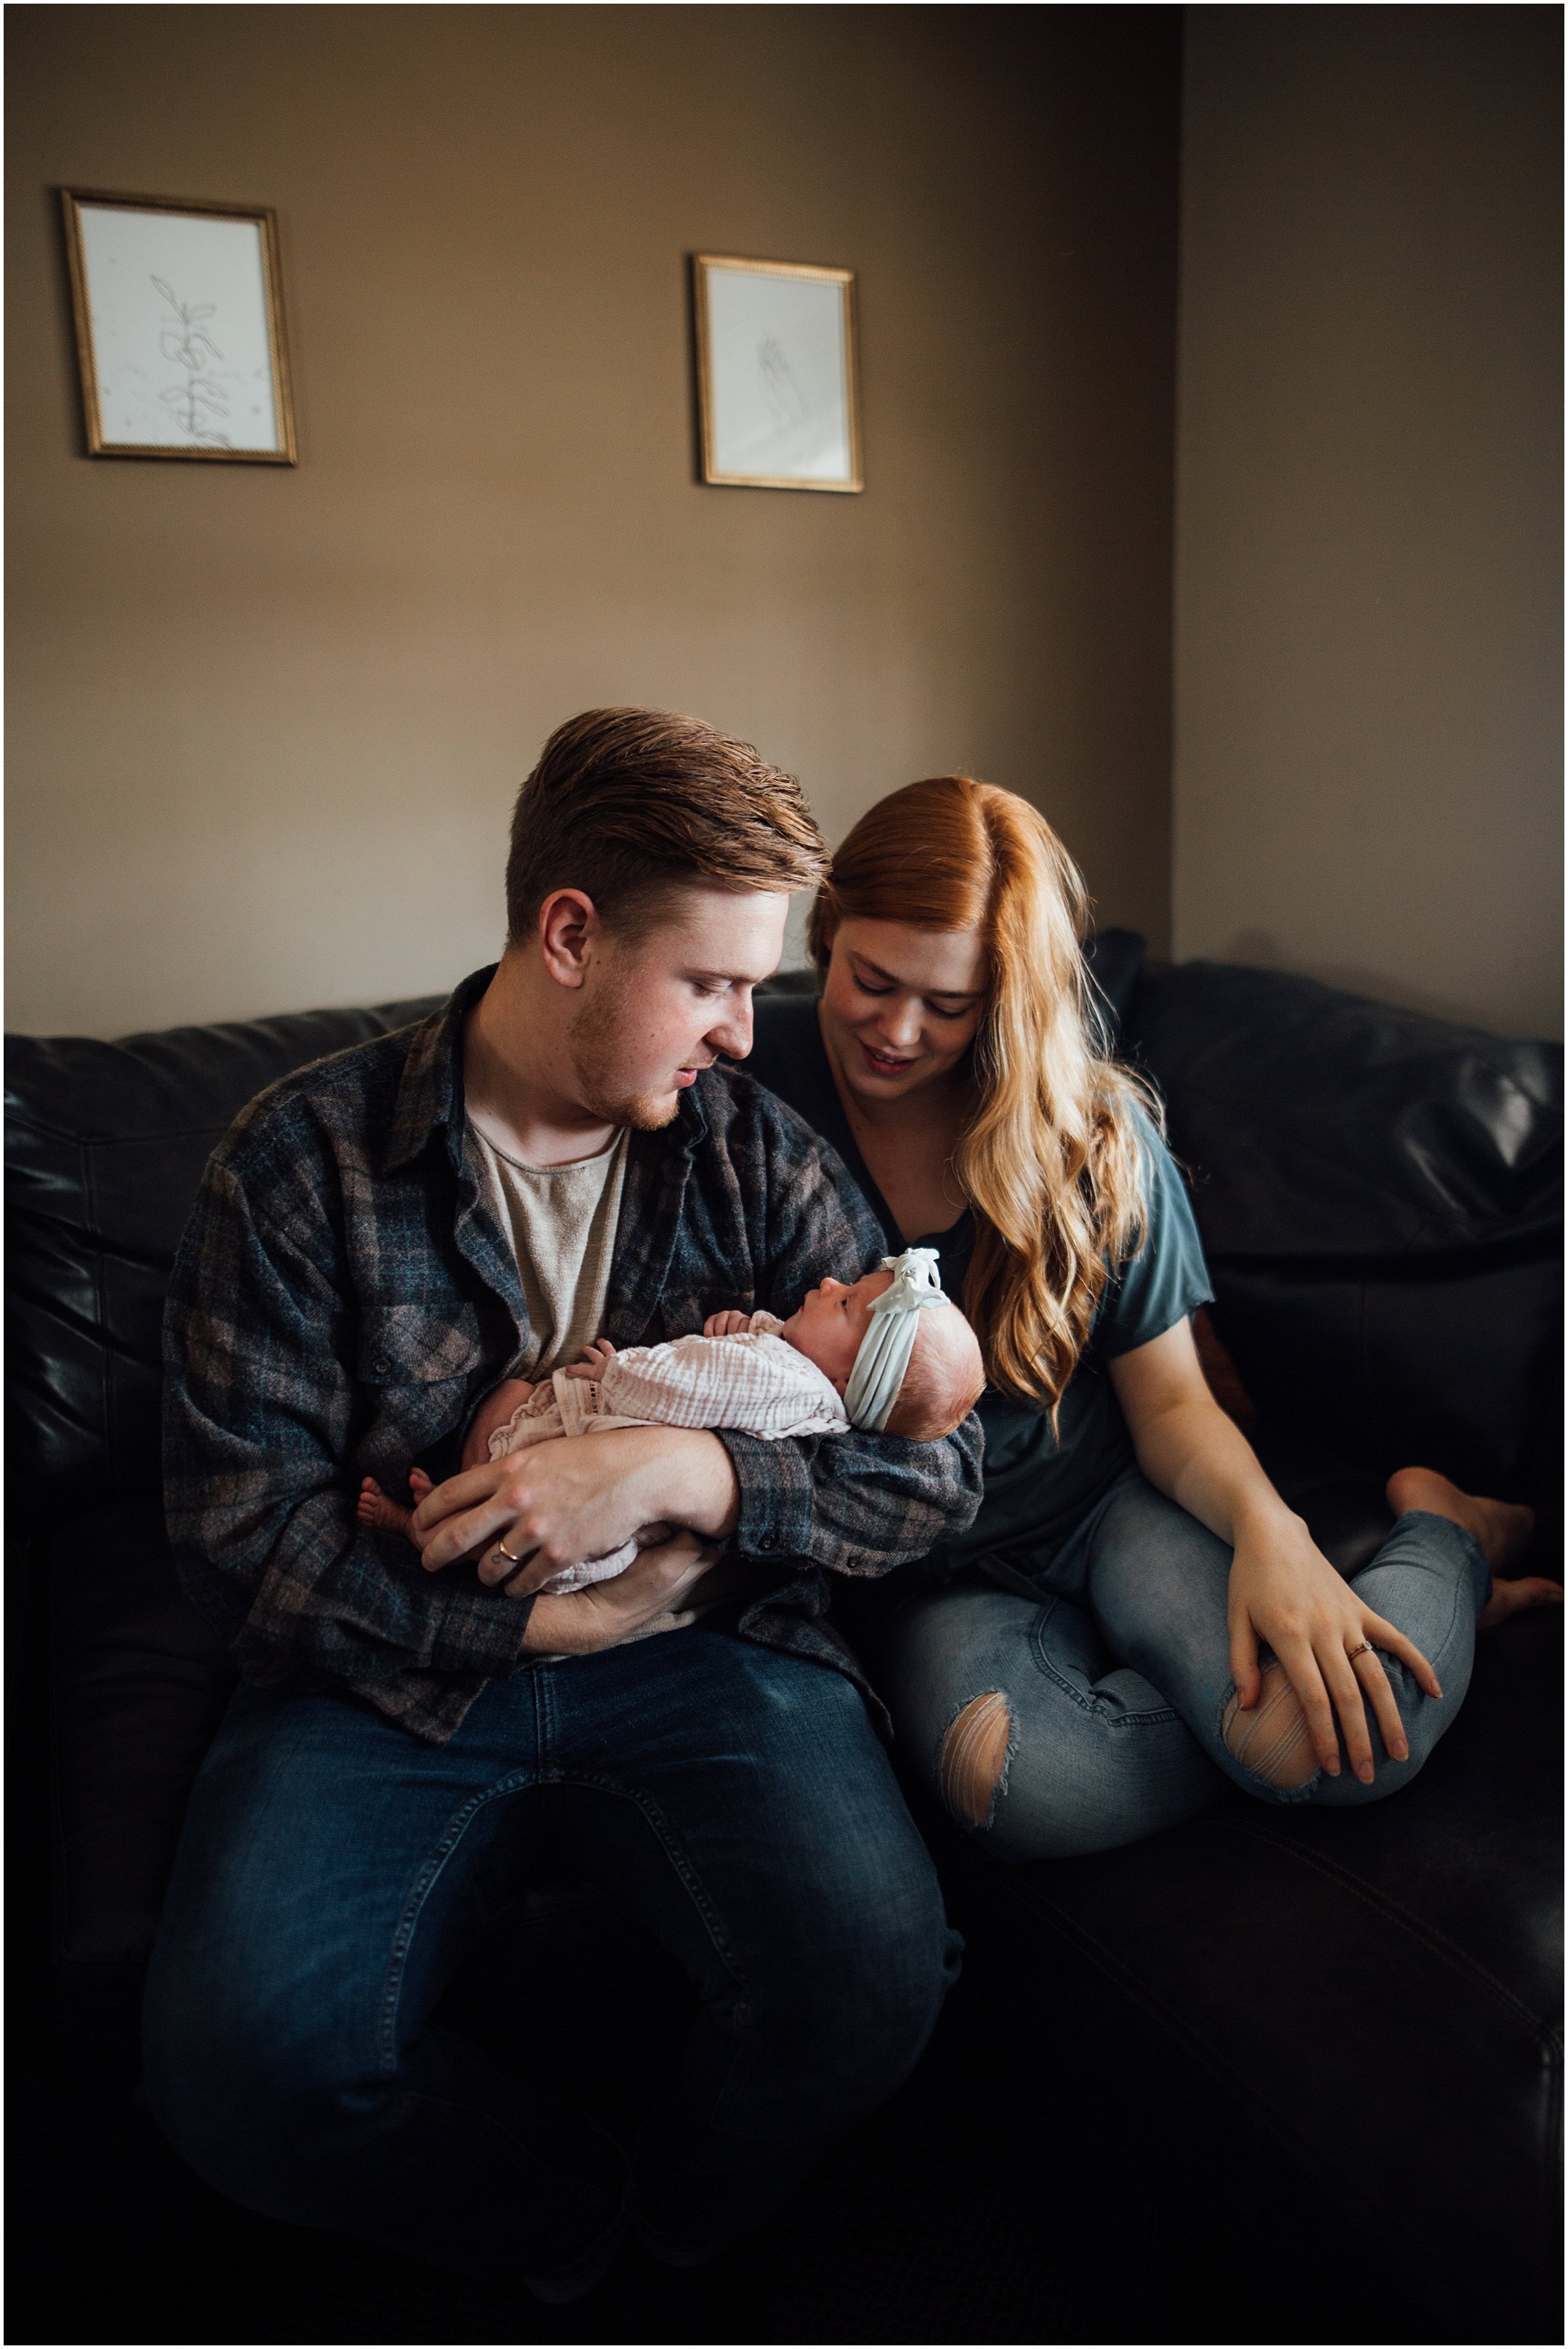 Kelly Lovan Photography | indiana newborn photography | newborn lifestyle photography ideas | newborn photography in home session